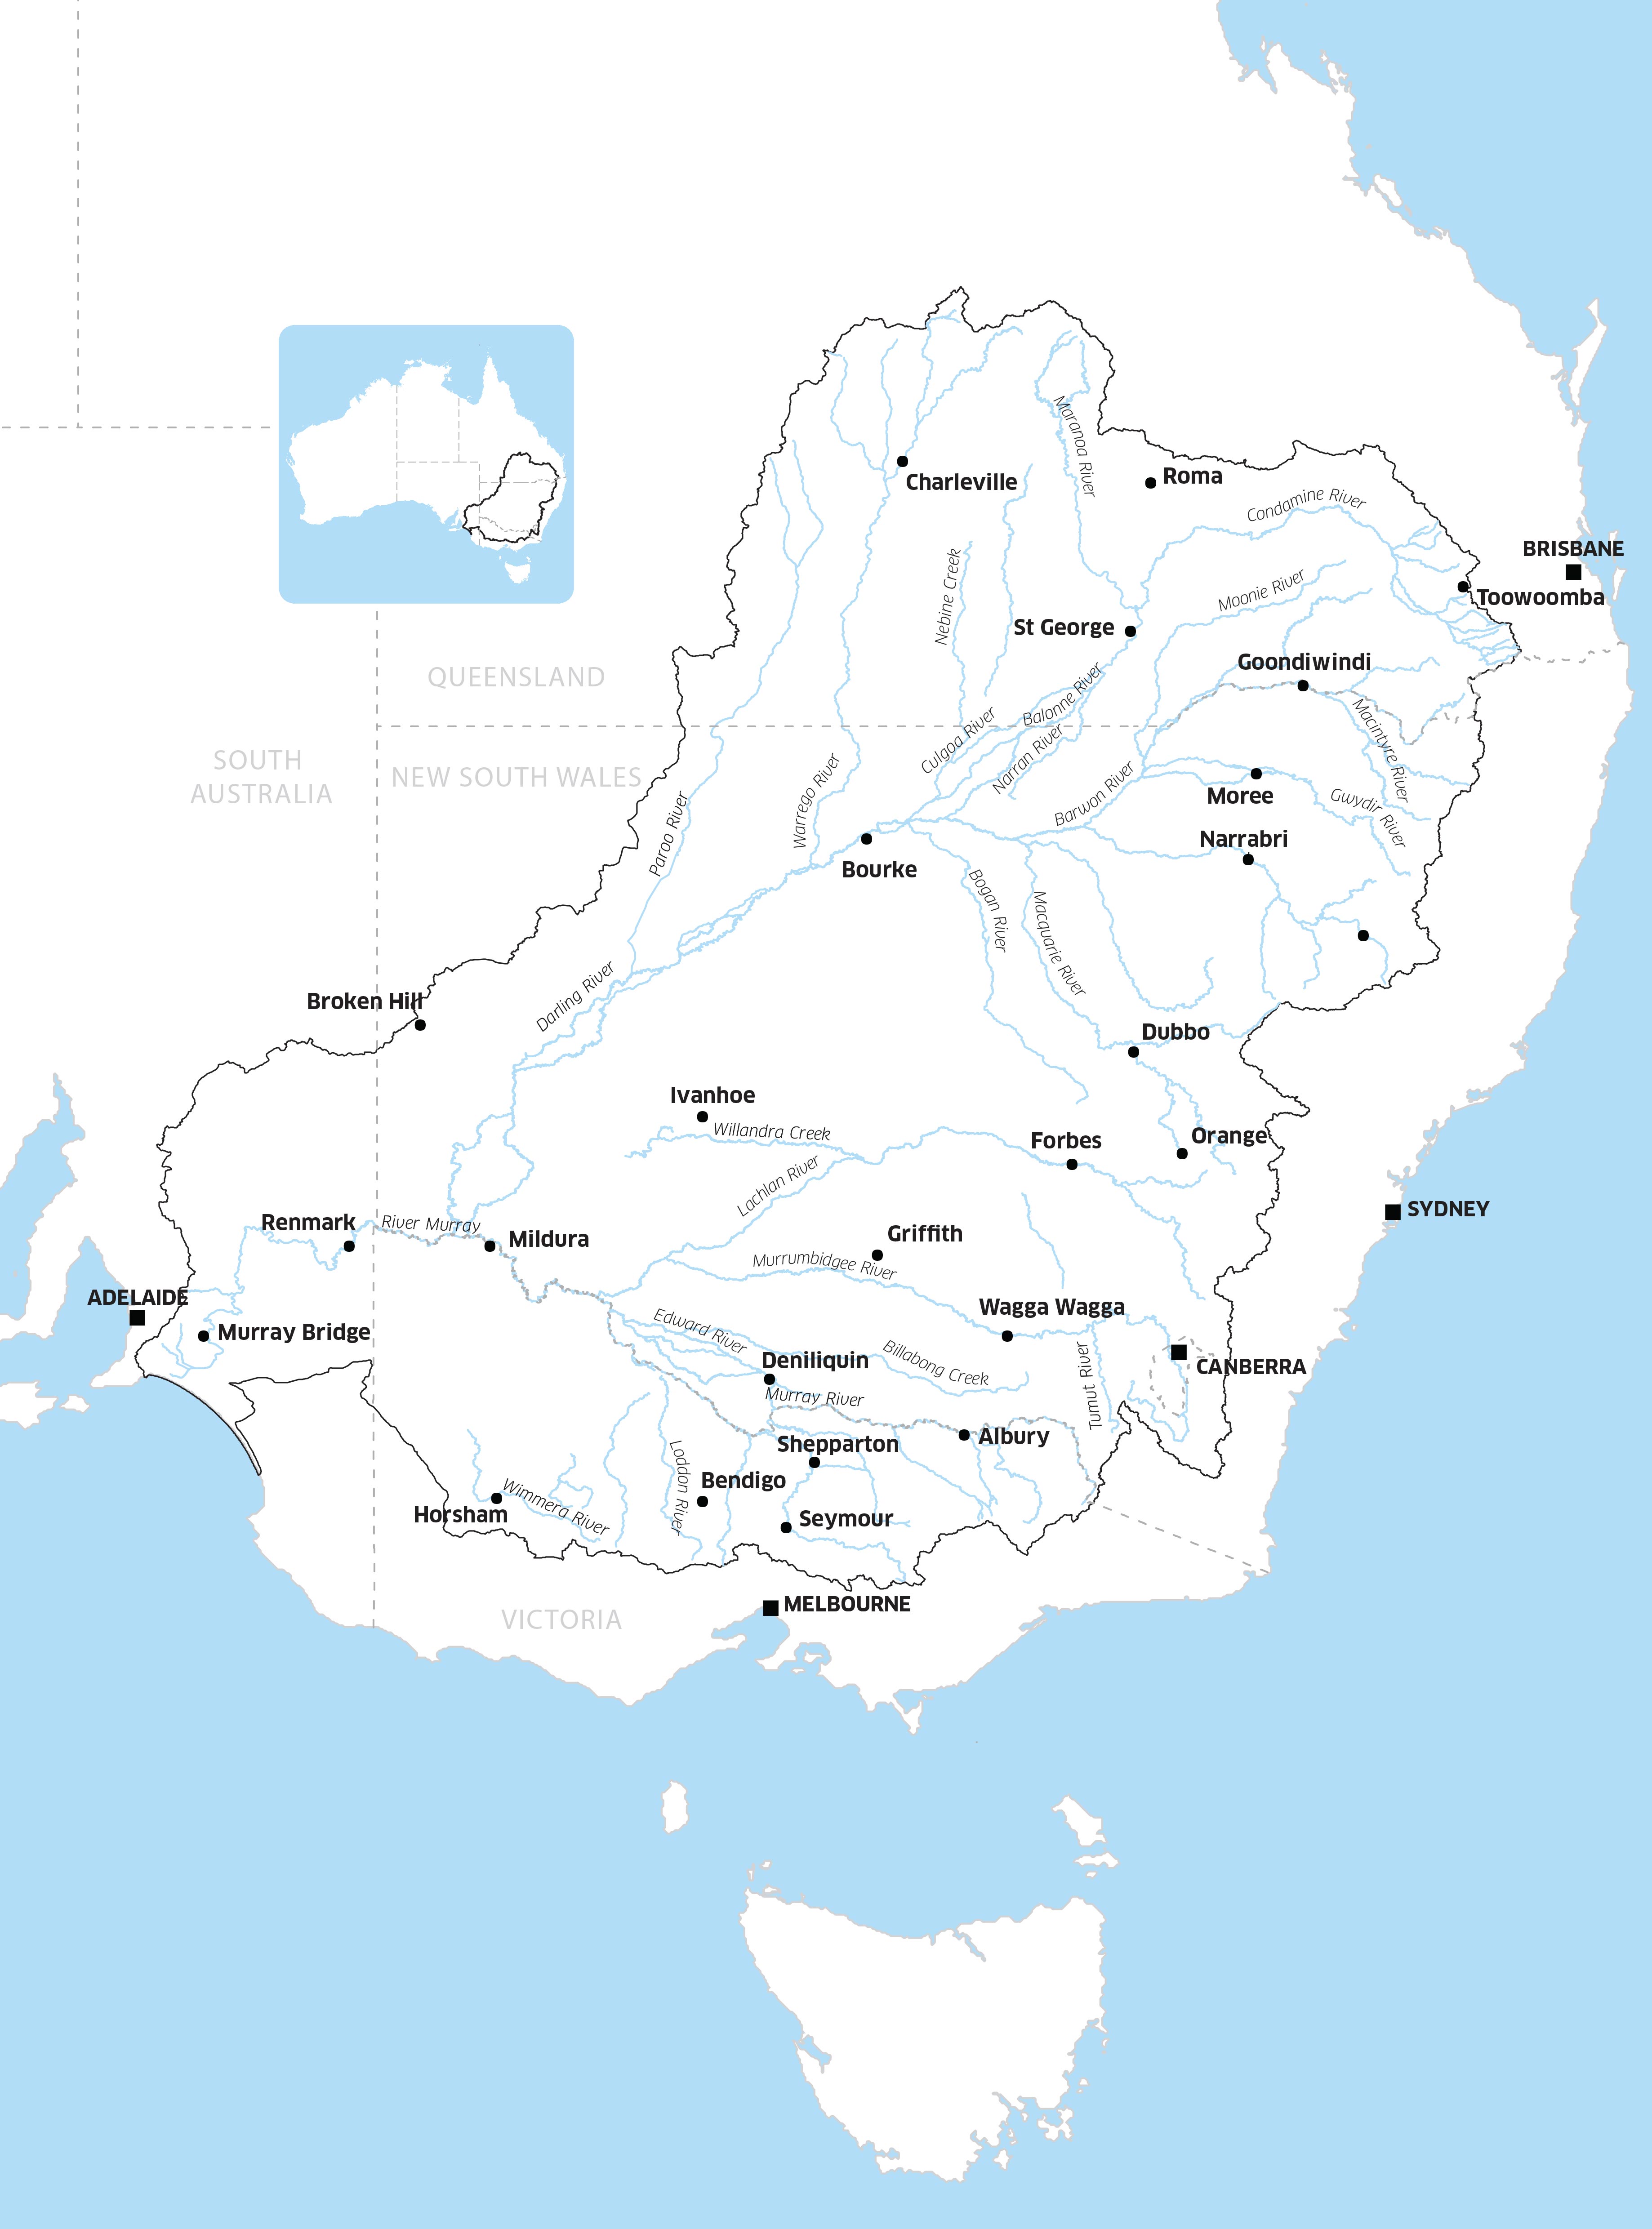 Boundary map of the Murray–Darling Basin.